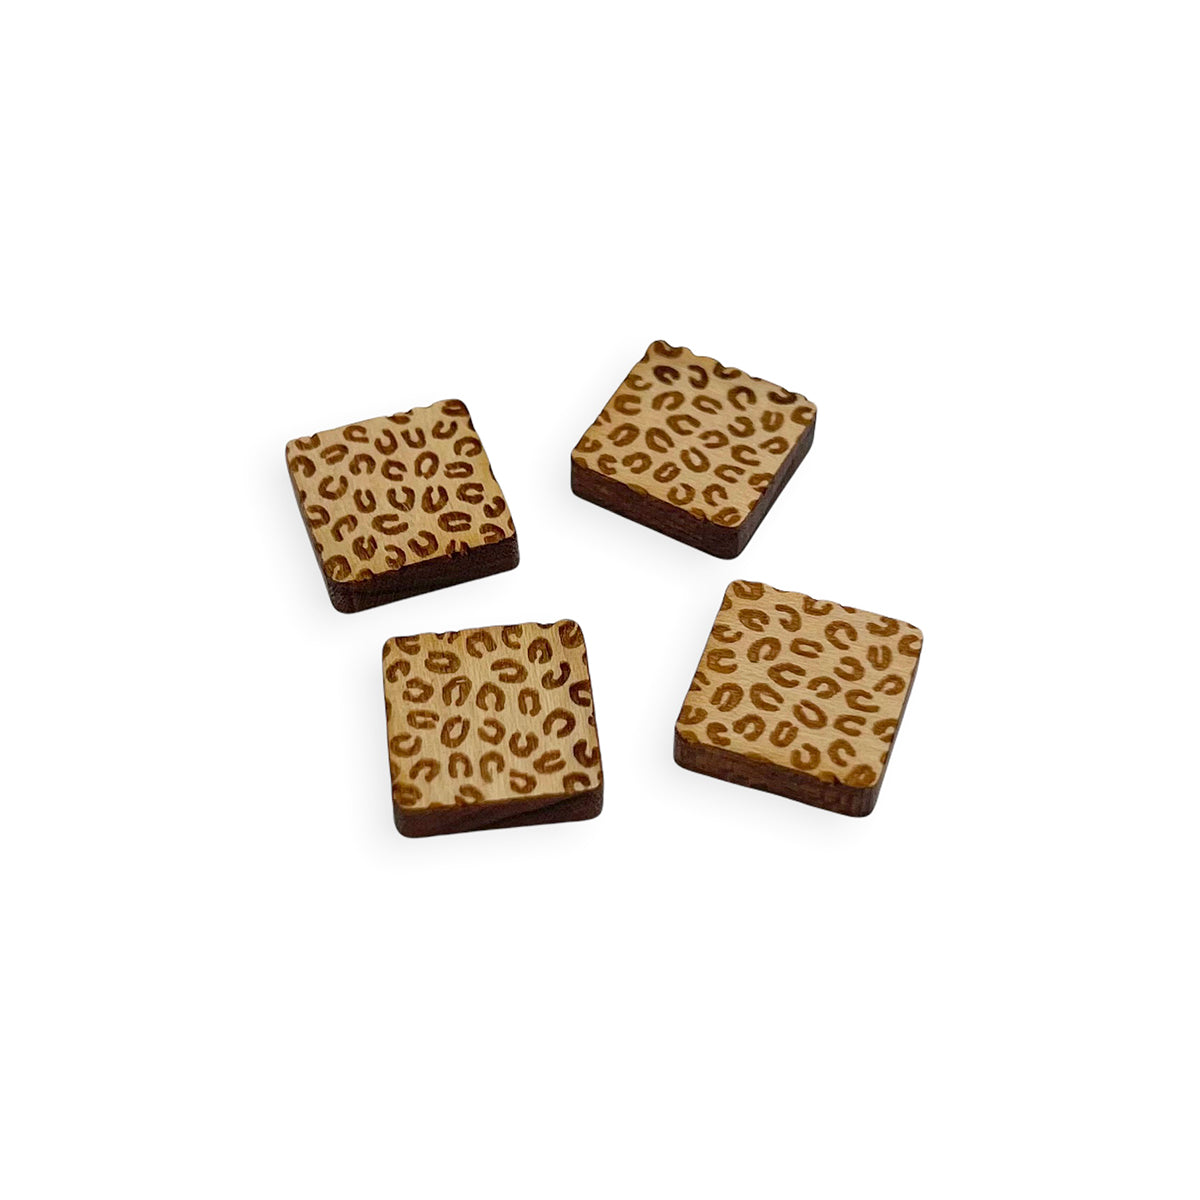 a pair of square wooden cabochon stud earring blanks engraved with a cheetah print pattern